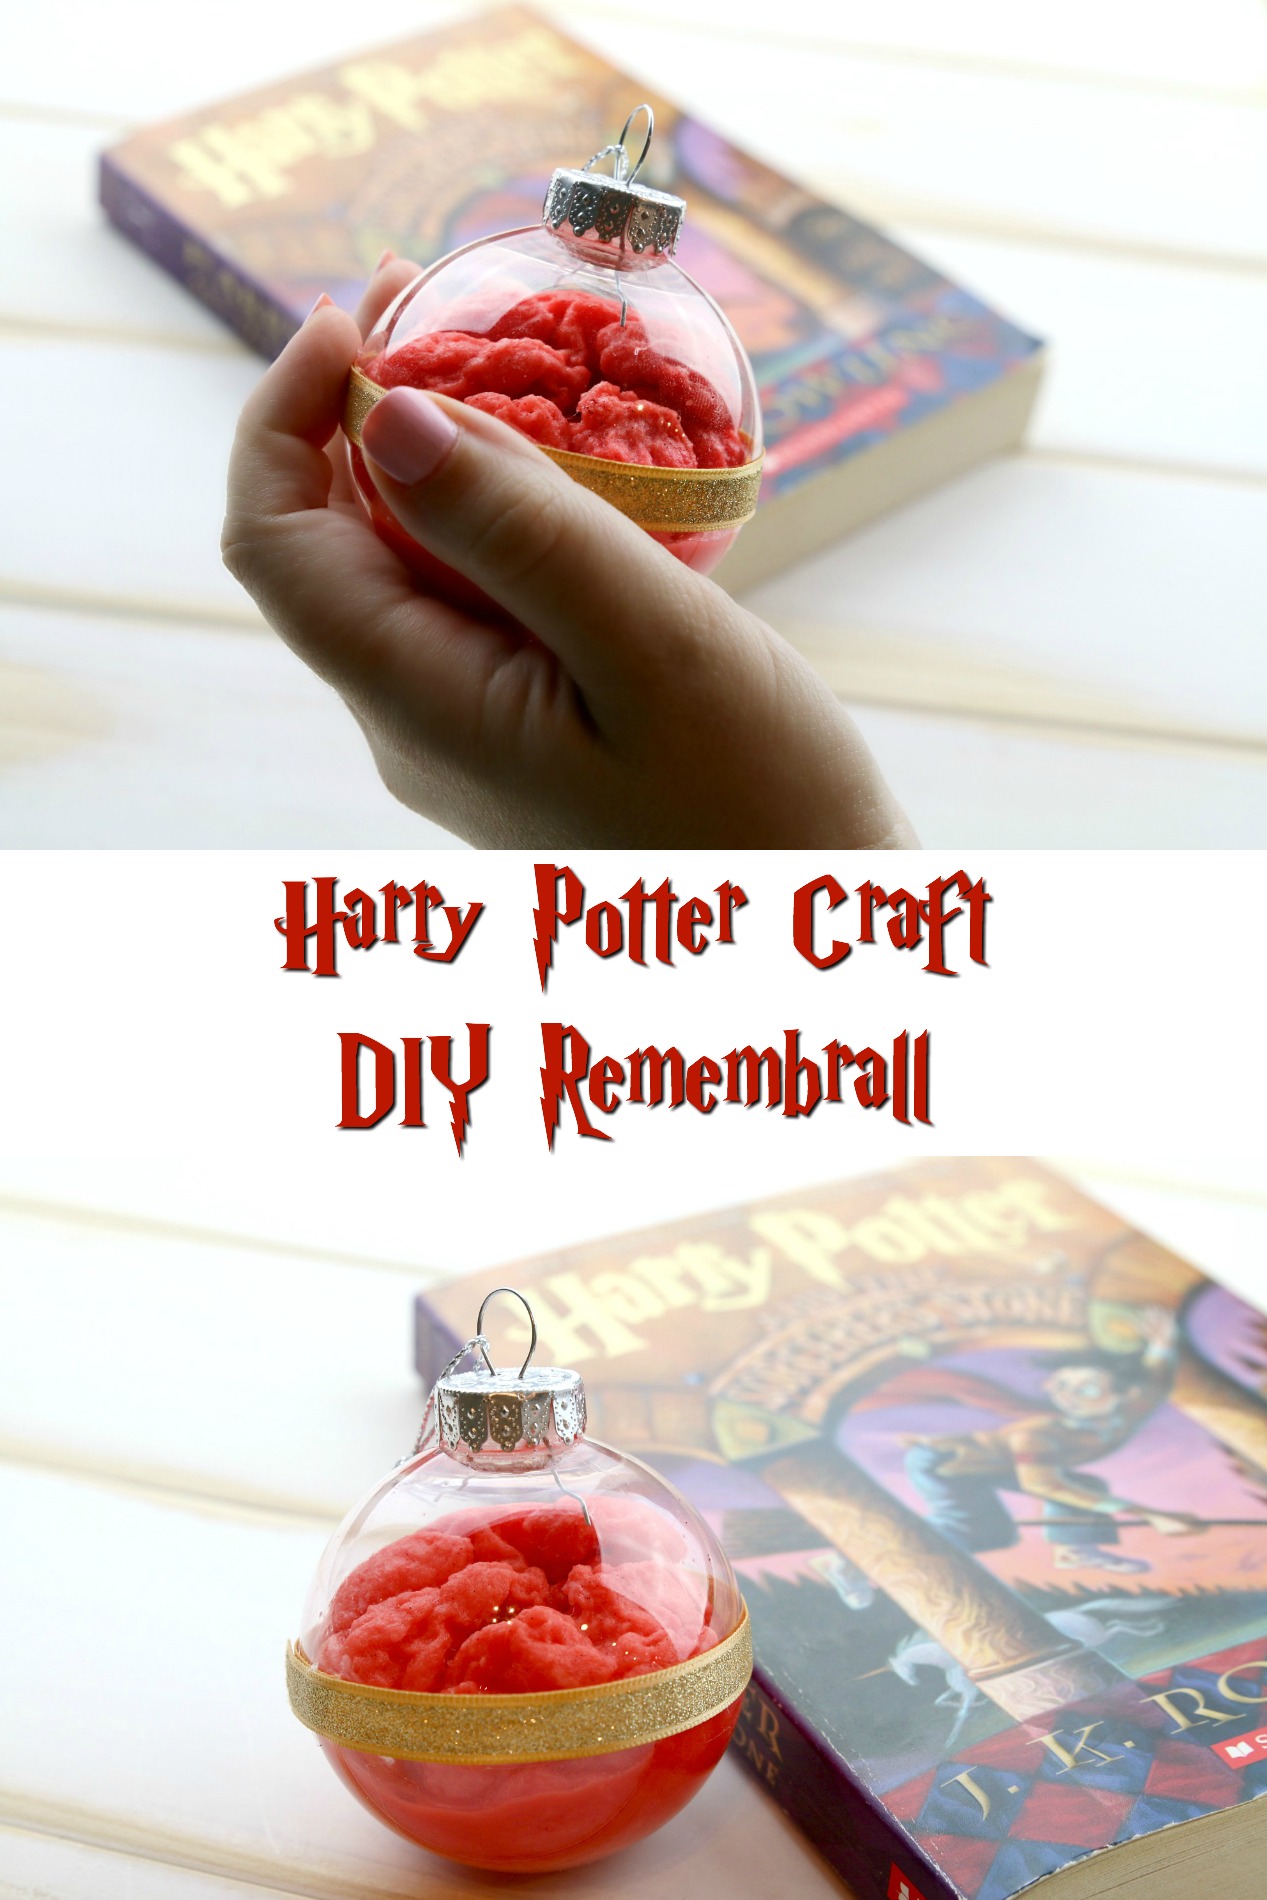 Harry Potter Craft DIY Remembrall